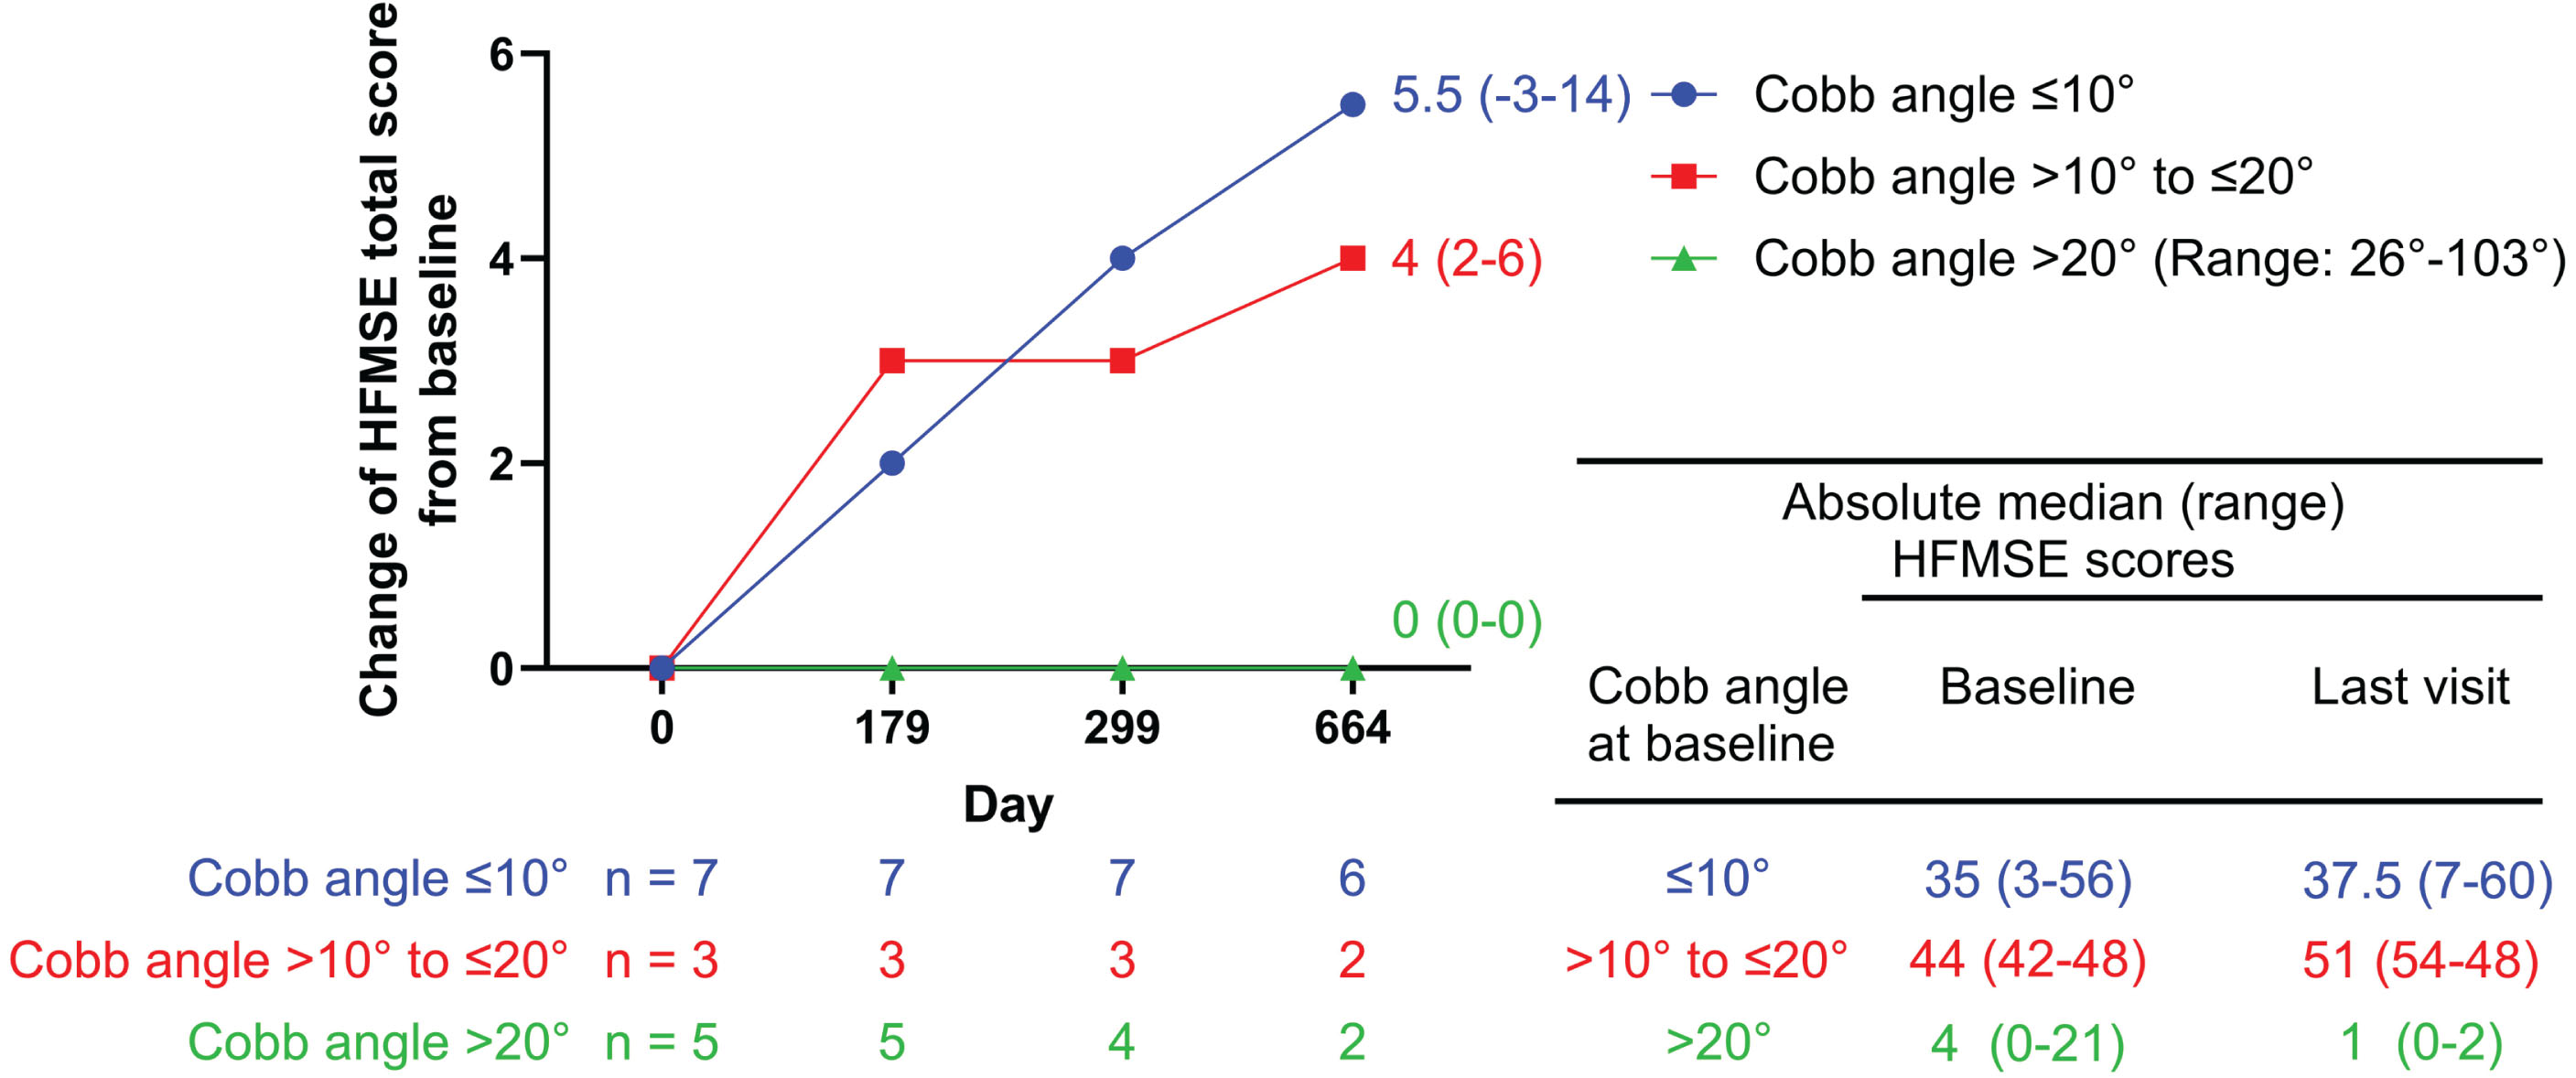 HFMSE scores over time by Cobb angle subgroup in SMA2 and SMA3 patients. SMA2 and SMA3 patients with no/mild scoliosis (Cobb angle ≤ 10°/Cobb angle > 10 to ≤20°) showed greater improvements in HFMSE scores, compared to those with severe scoliosis (Cobb angle > 20°).